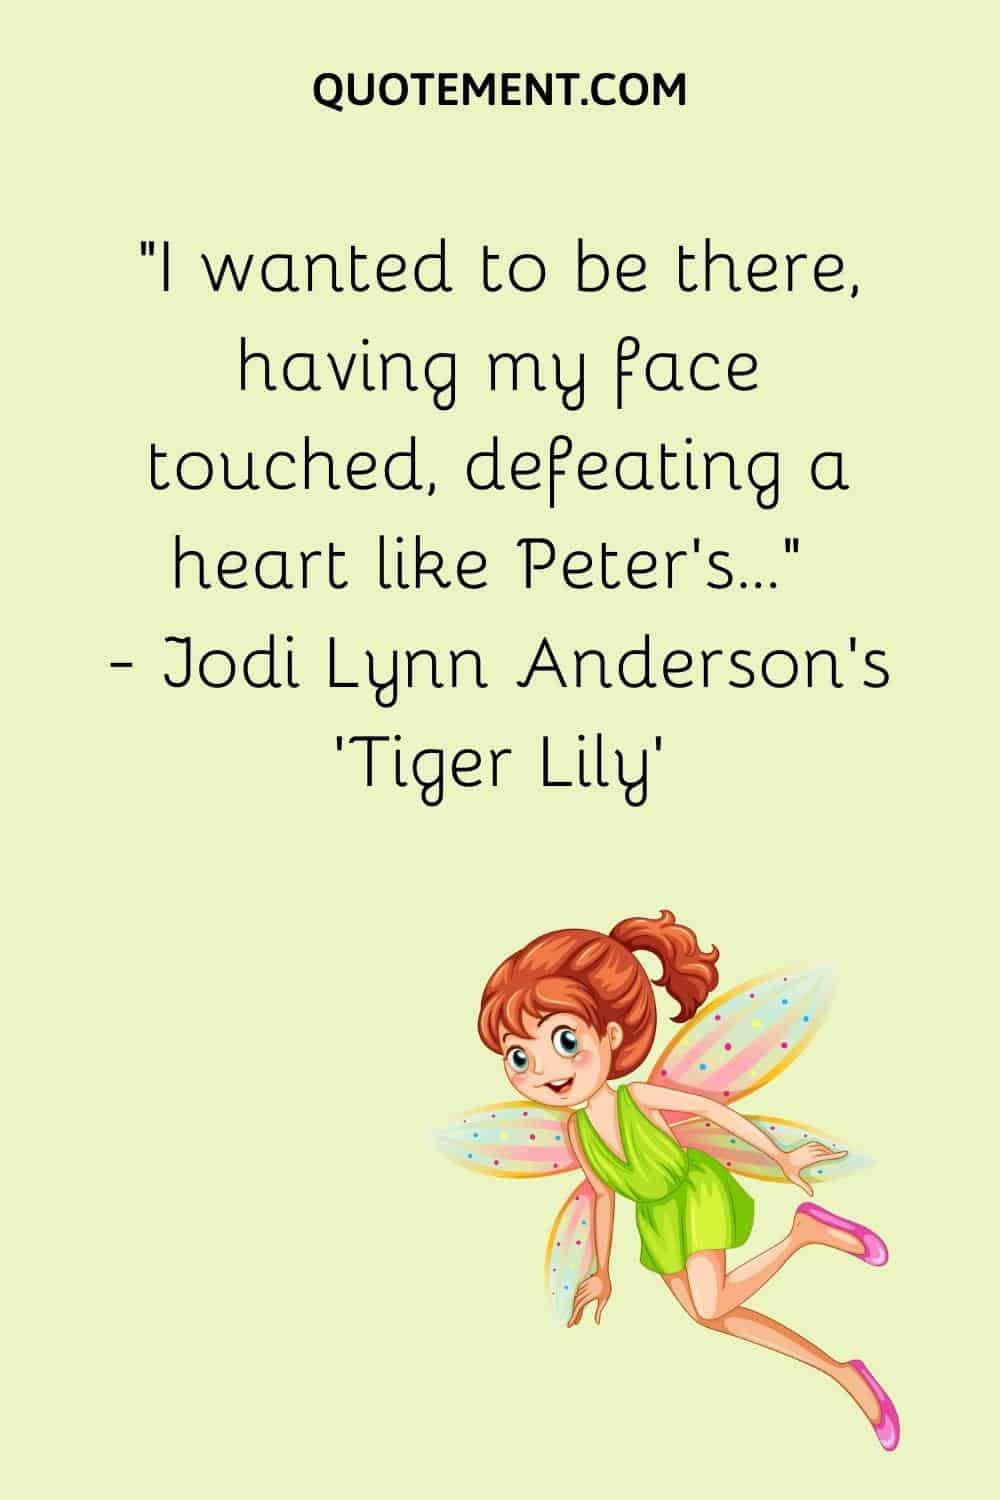 I wanted to be there, having my face touched, defeating a heart like Peter's